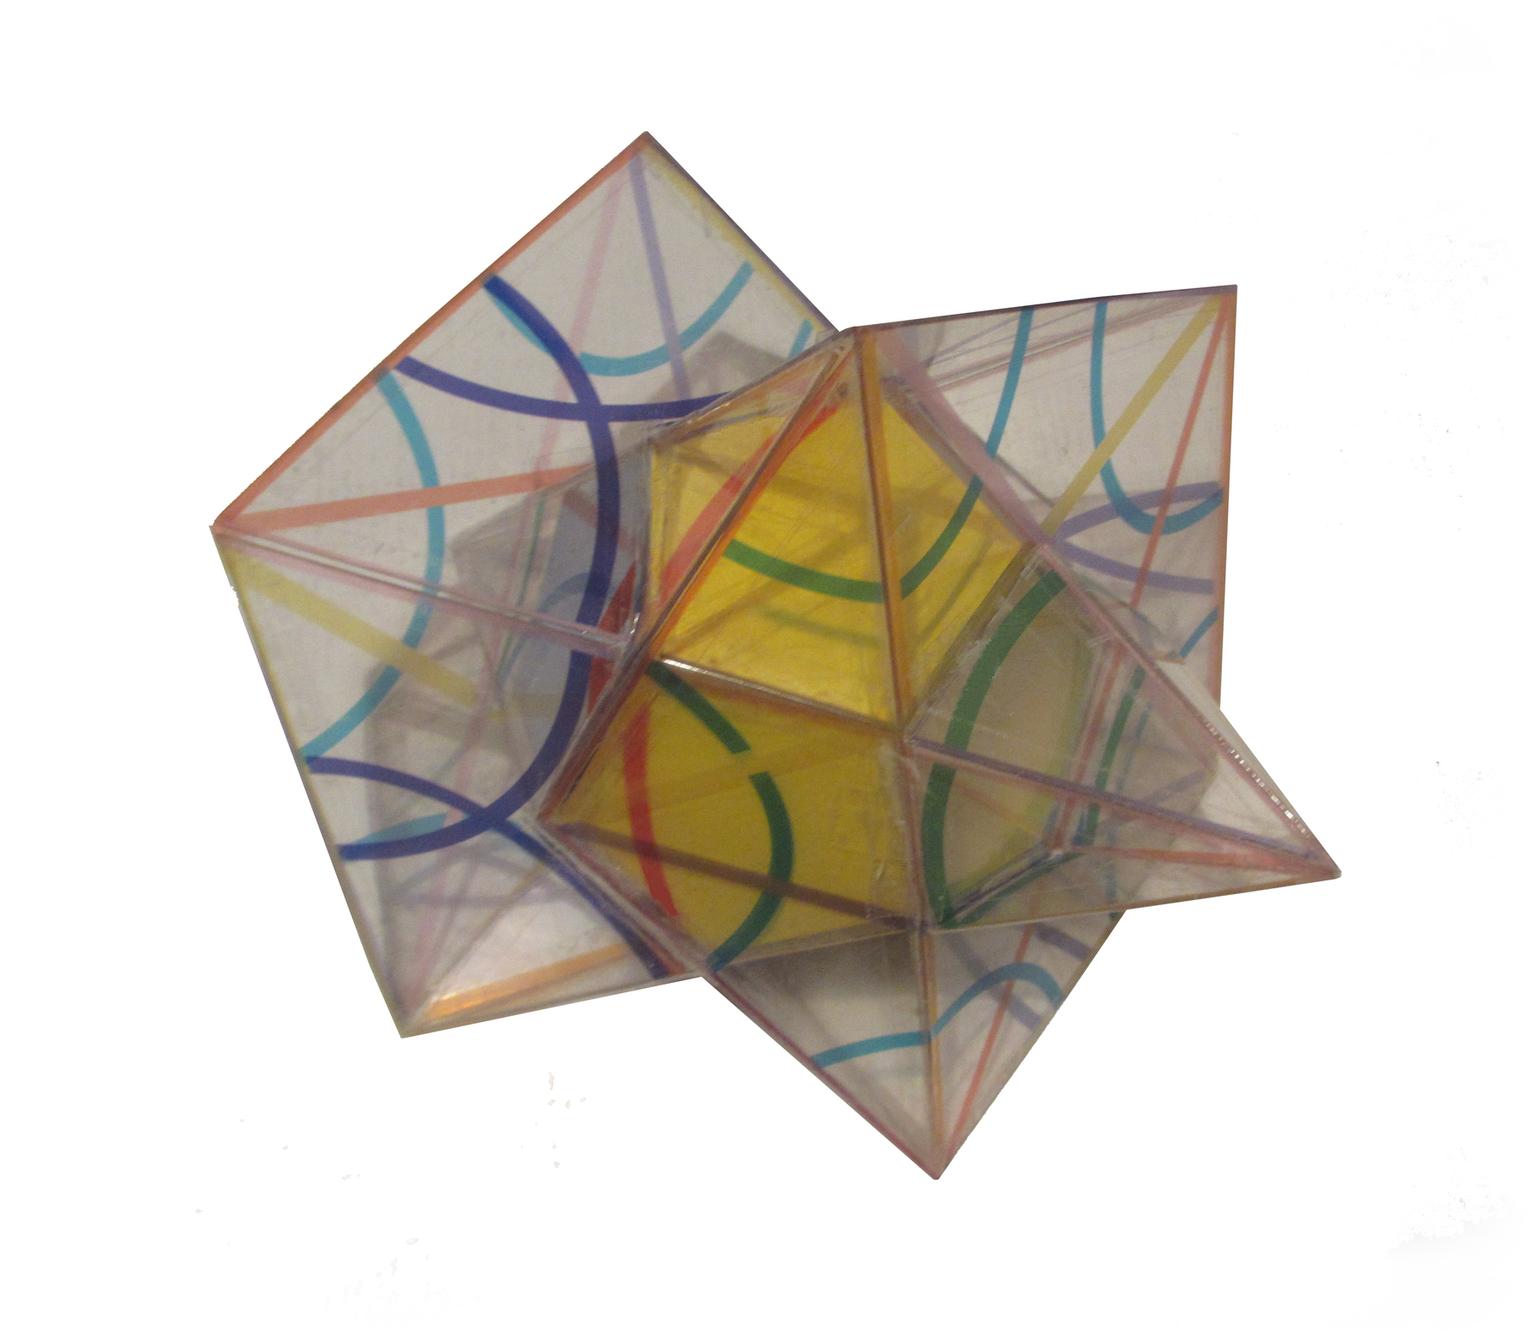 Image for entry 'The Creation of a Dodecahedron'